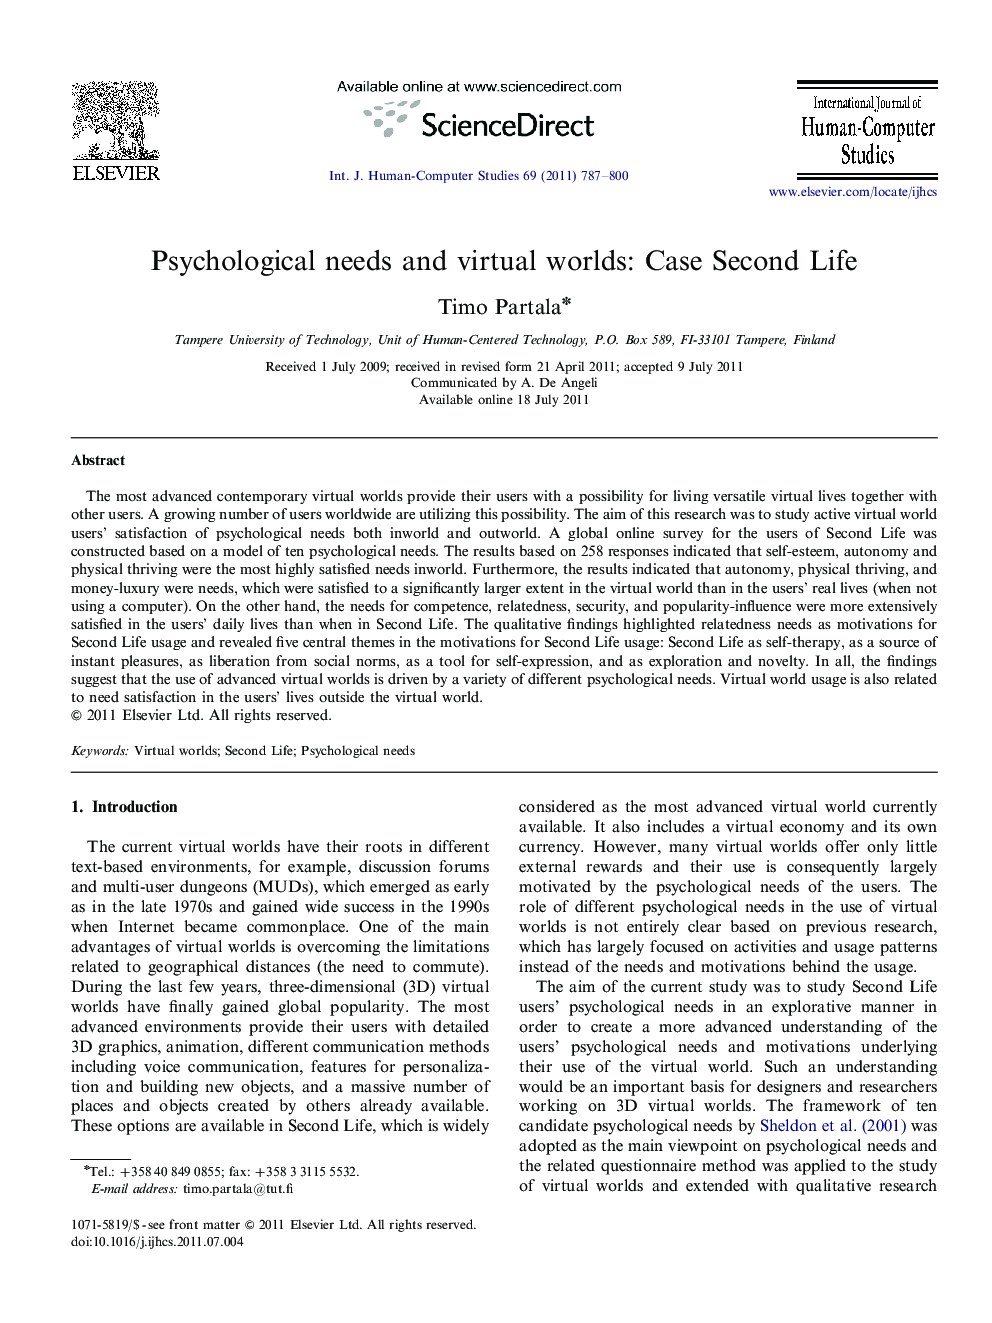 Psychological needs and virtual worlds: Case Second Life